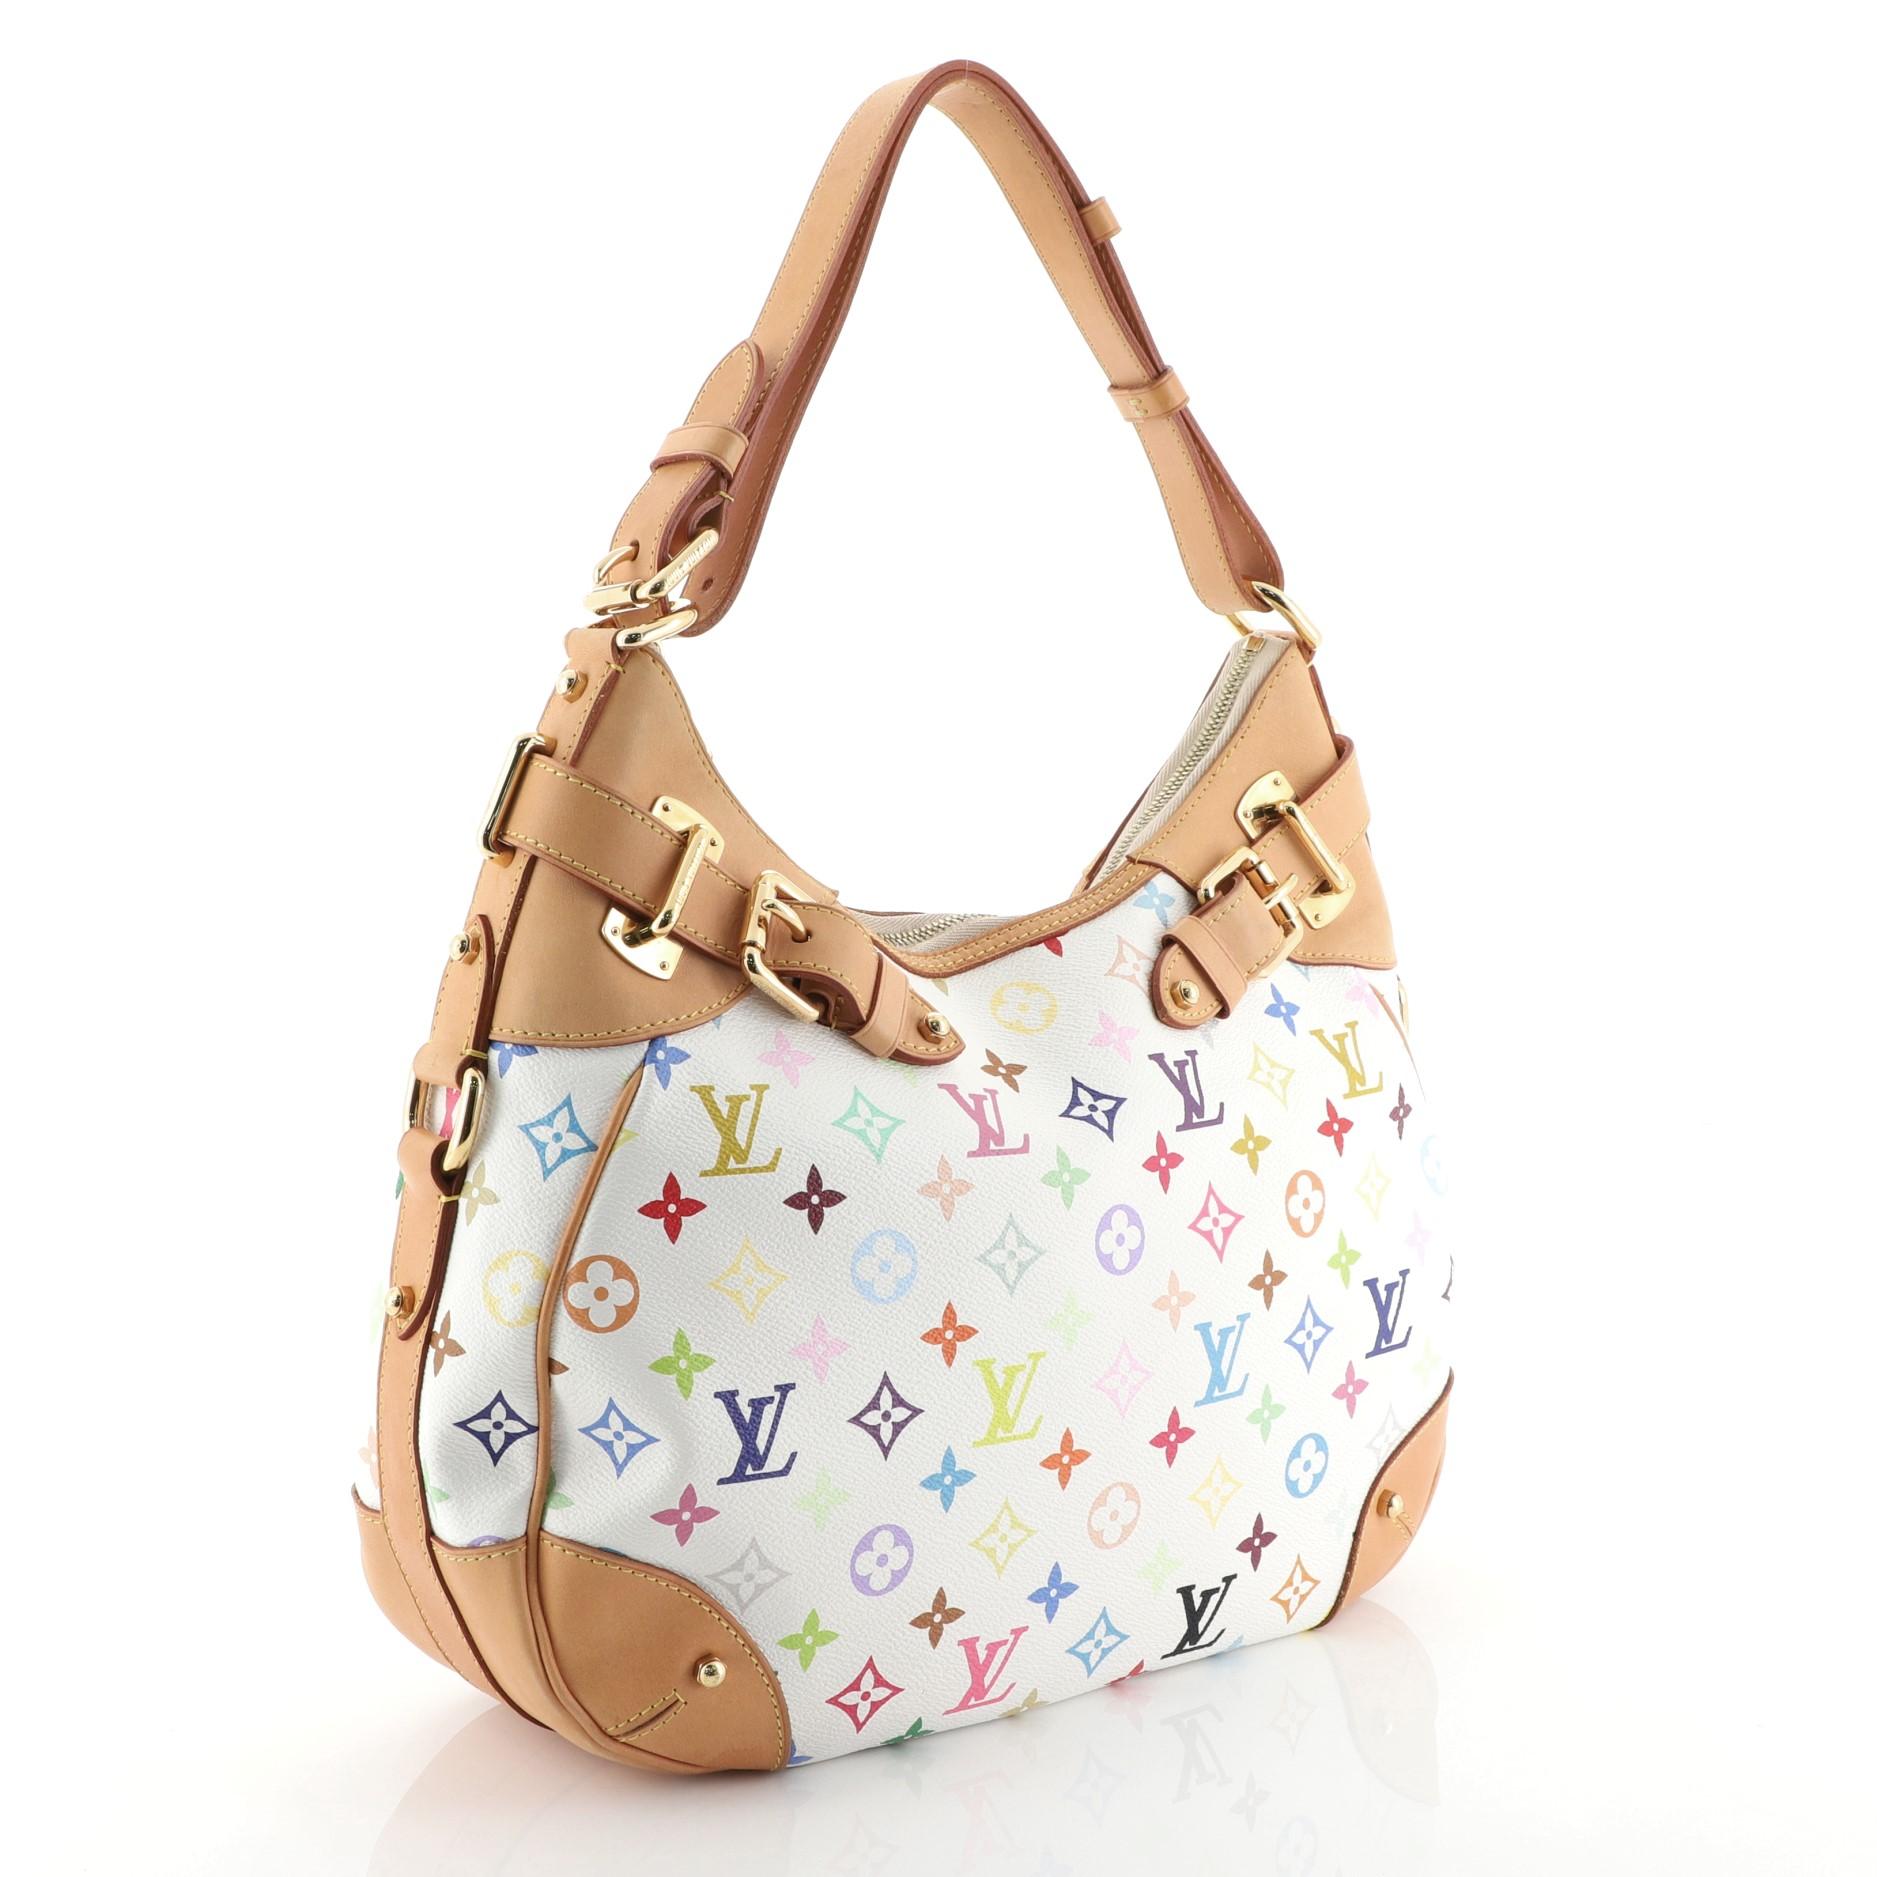 This Louis Vuitton Greta Handbag Monogram Multicolor, crafted in white multicolor monogram coated canvas, features an adjustable strap, cowhide leather trim, and gold-tone hardware. Its zip closure opens to a red microfiber interior with side zip